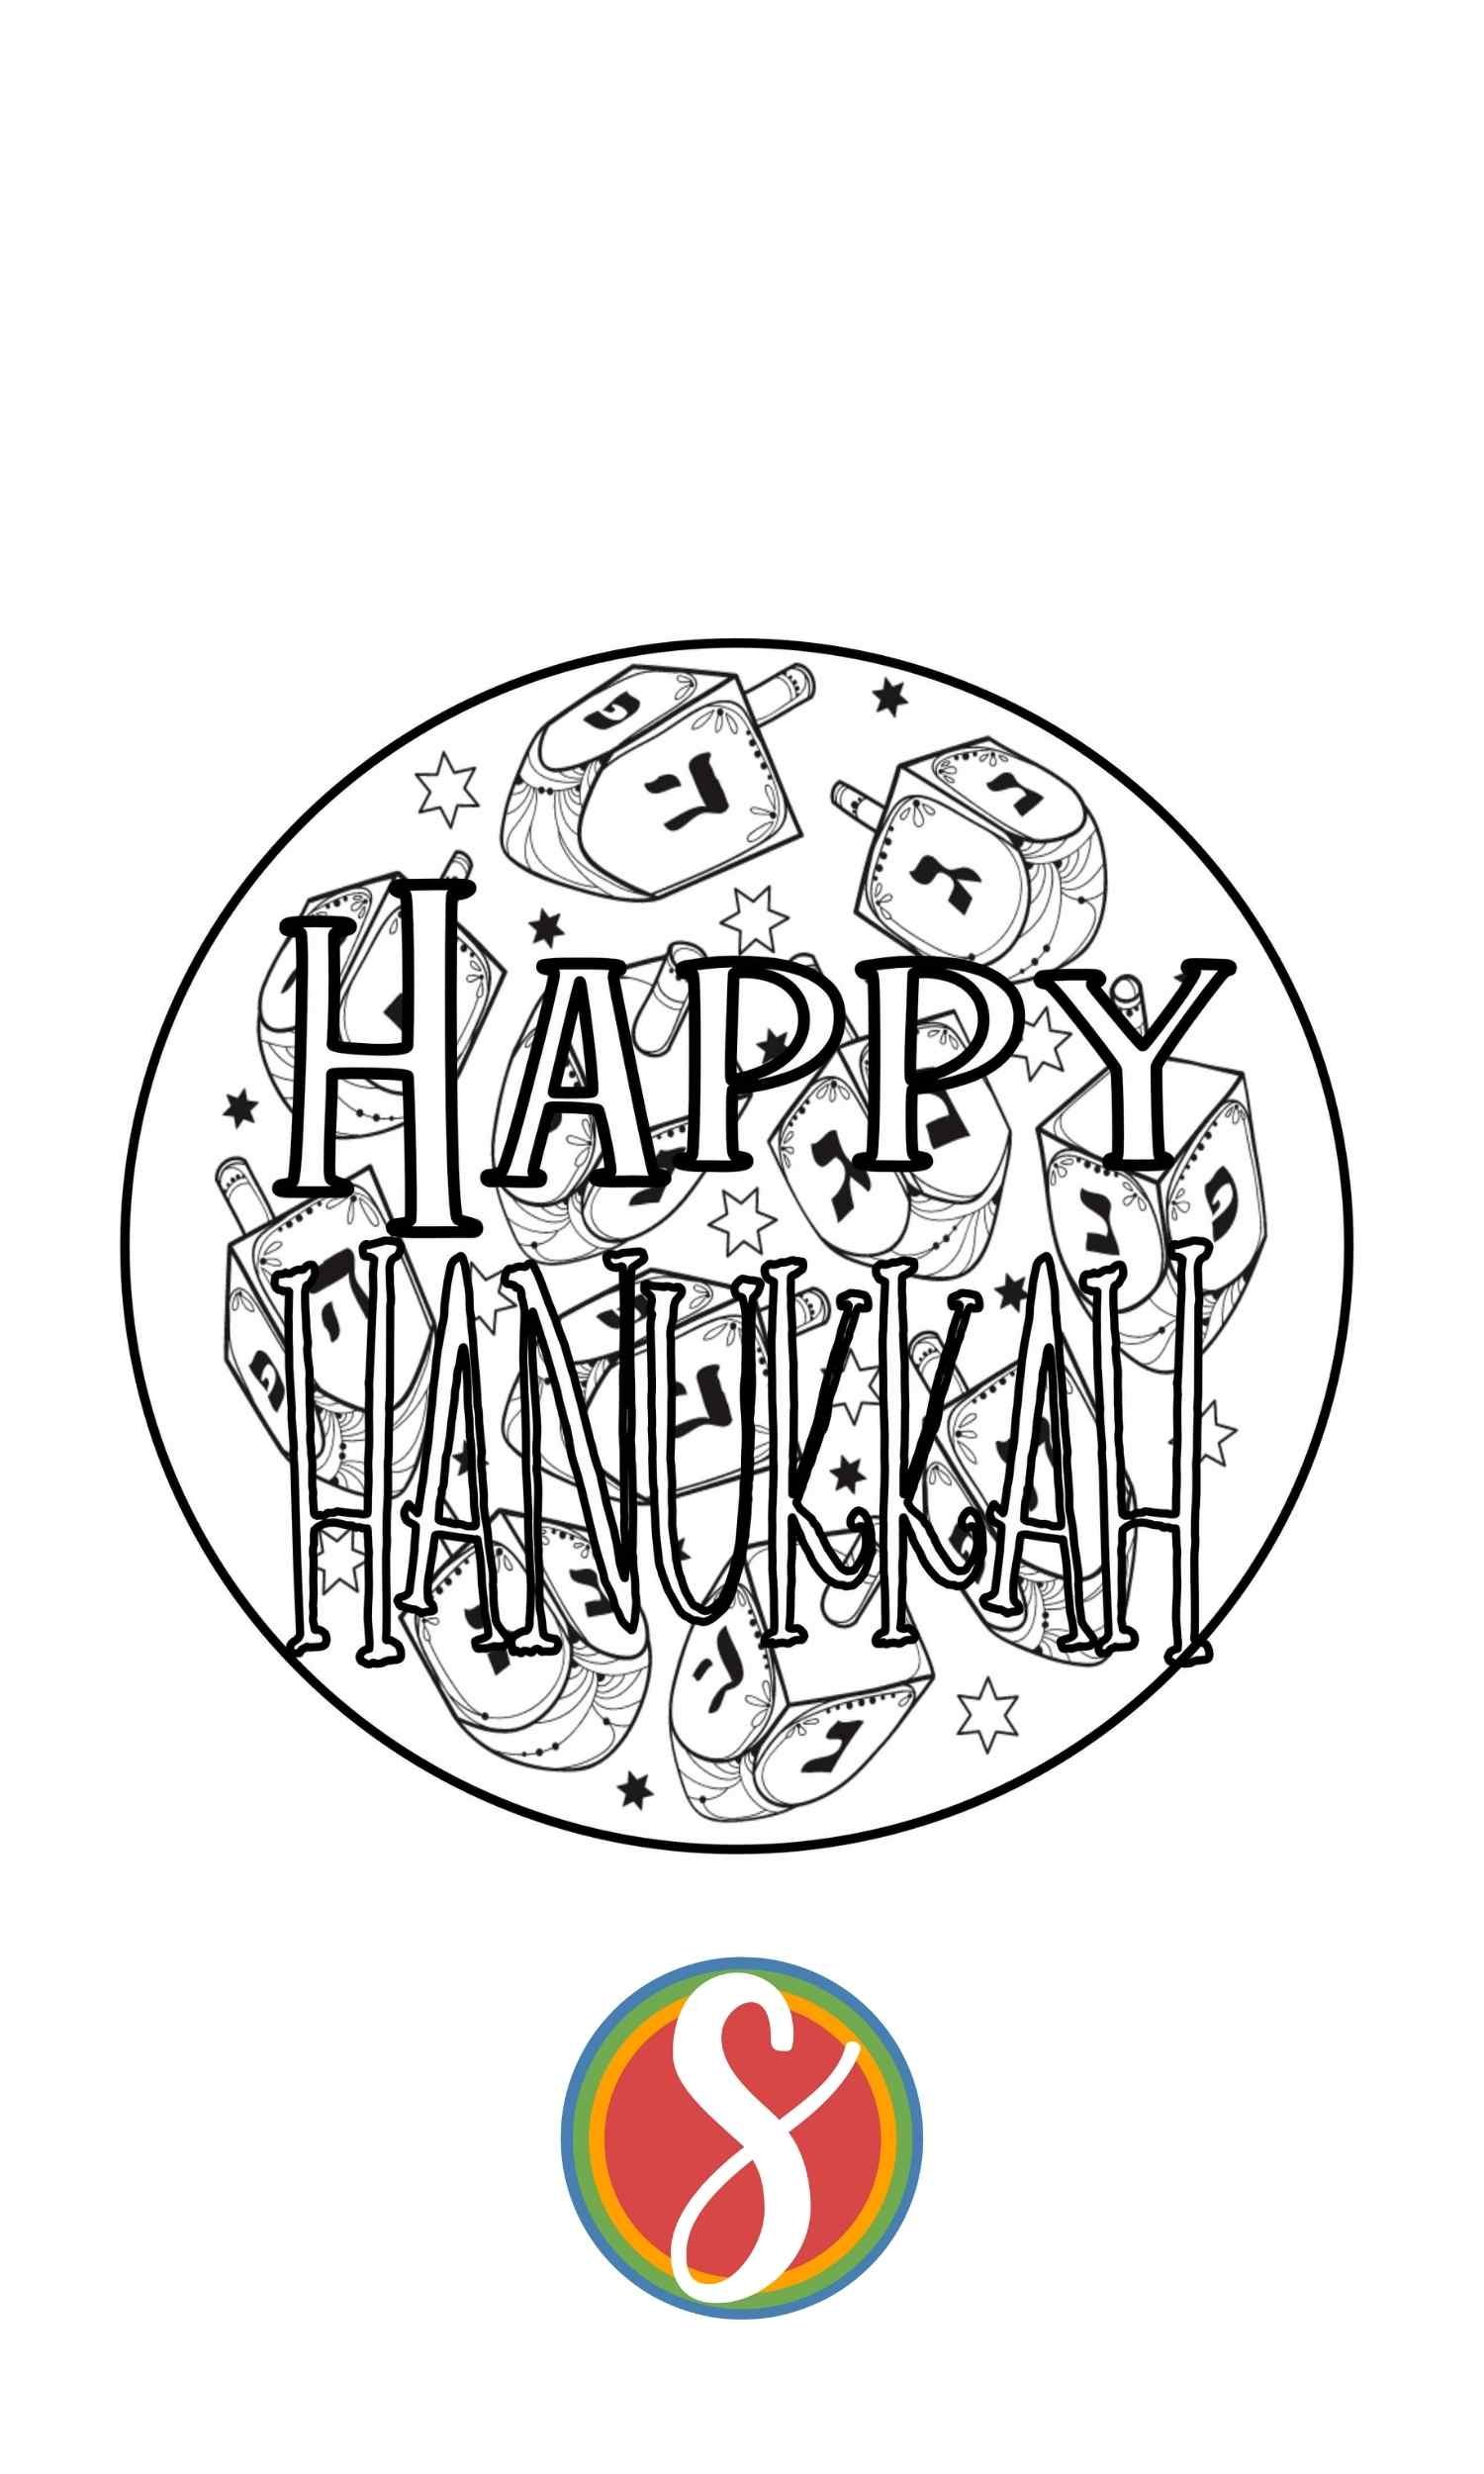 a circle full of dreidels with text "Happy Hannukah" on top coloring page